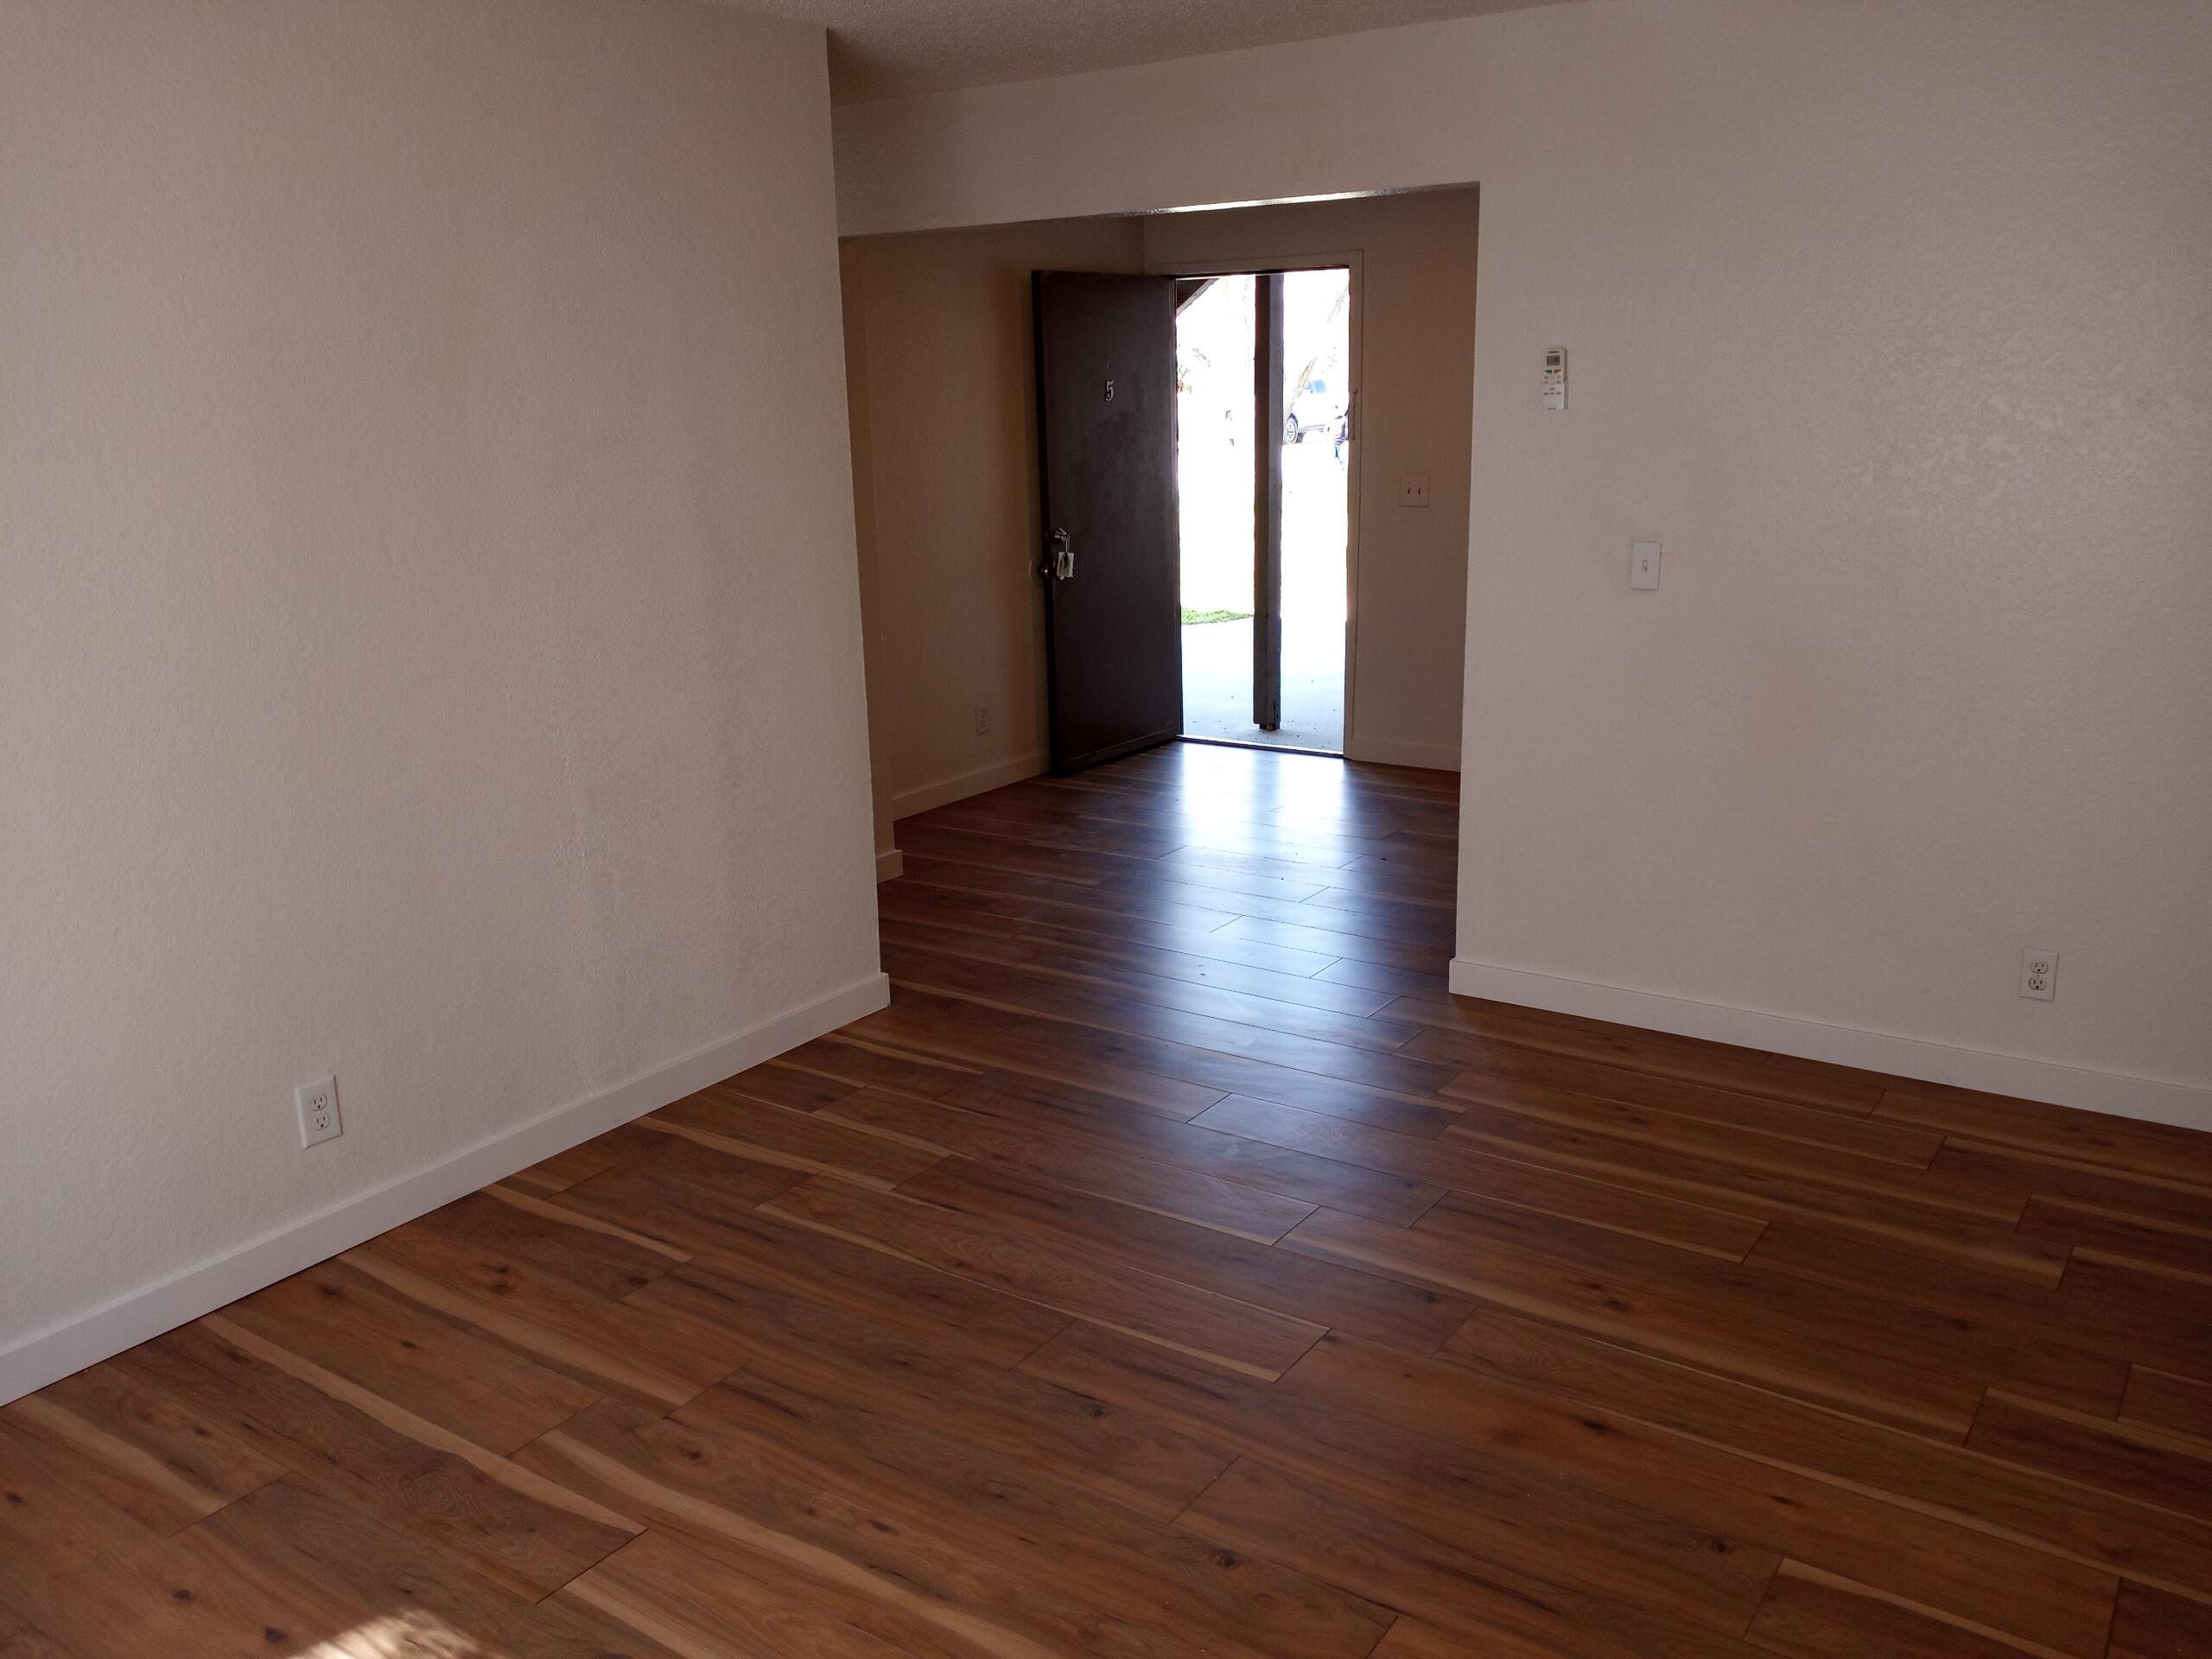 a view of a room with wooden floor and window